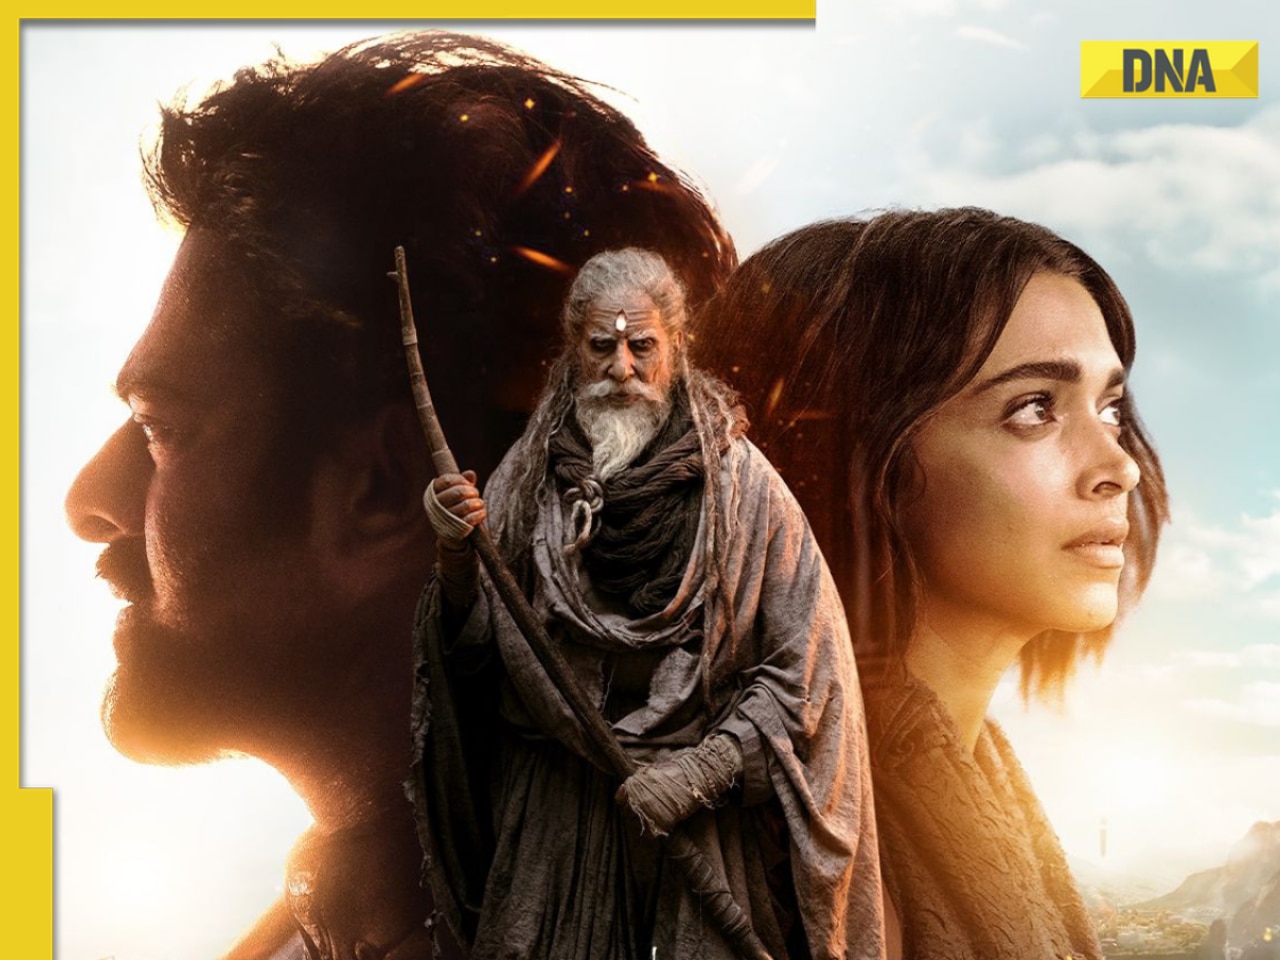 Kalki 2898 AD box office: Prabhas, Big B film set for Rs 200-crore opening? Here's how it can beat Jawan, Pathaan, KGF